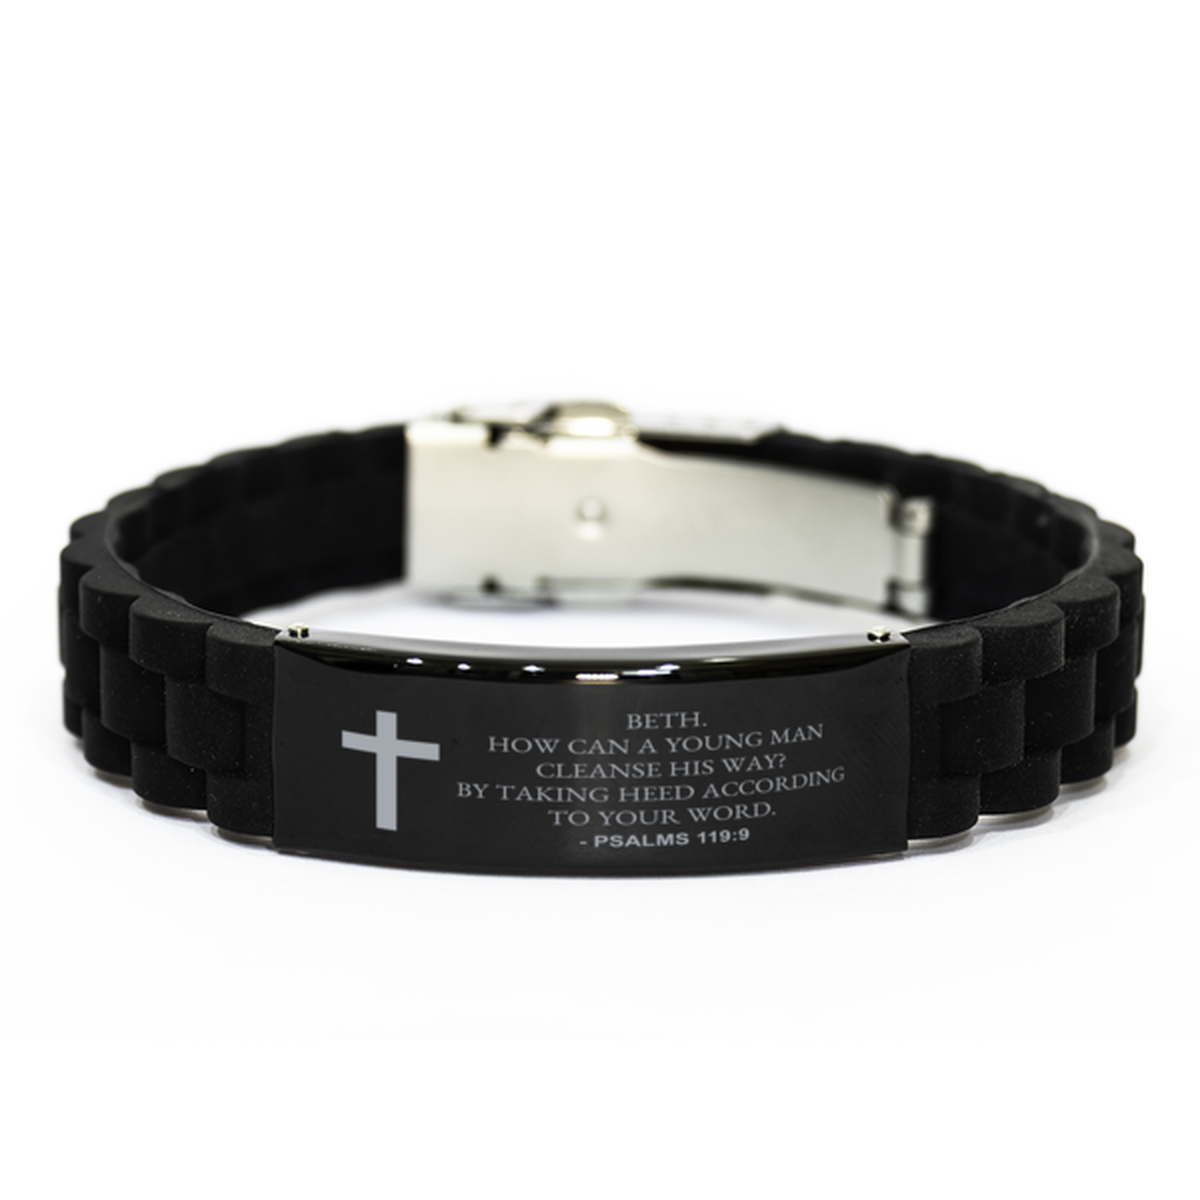 Bible Verse Black Bracelet,, Psalms 119:9 Beth. How Can A Young Man Cleanse His Way? By, Inspirational Christian Gifts For Men Women